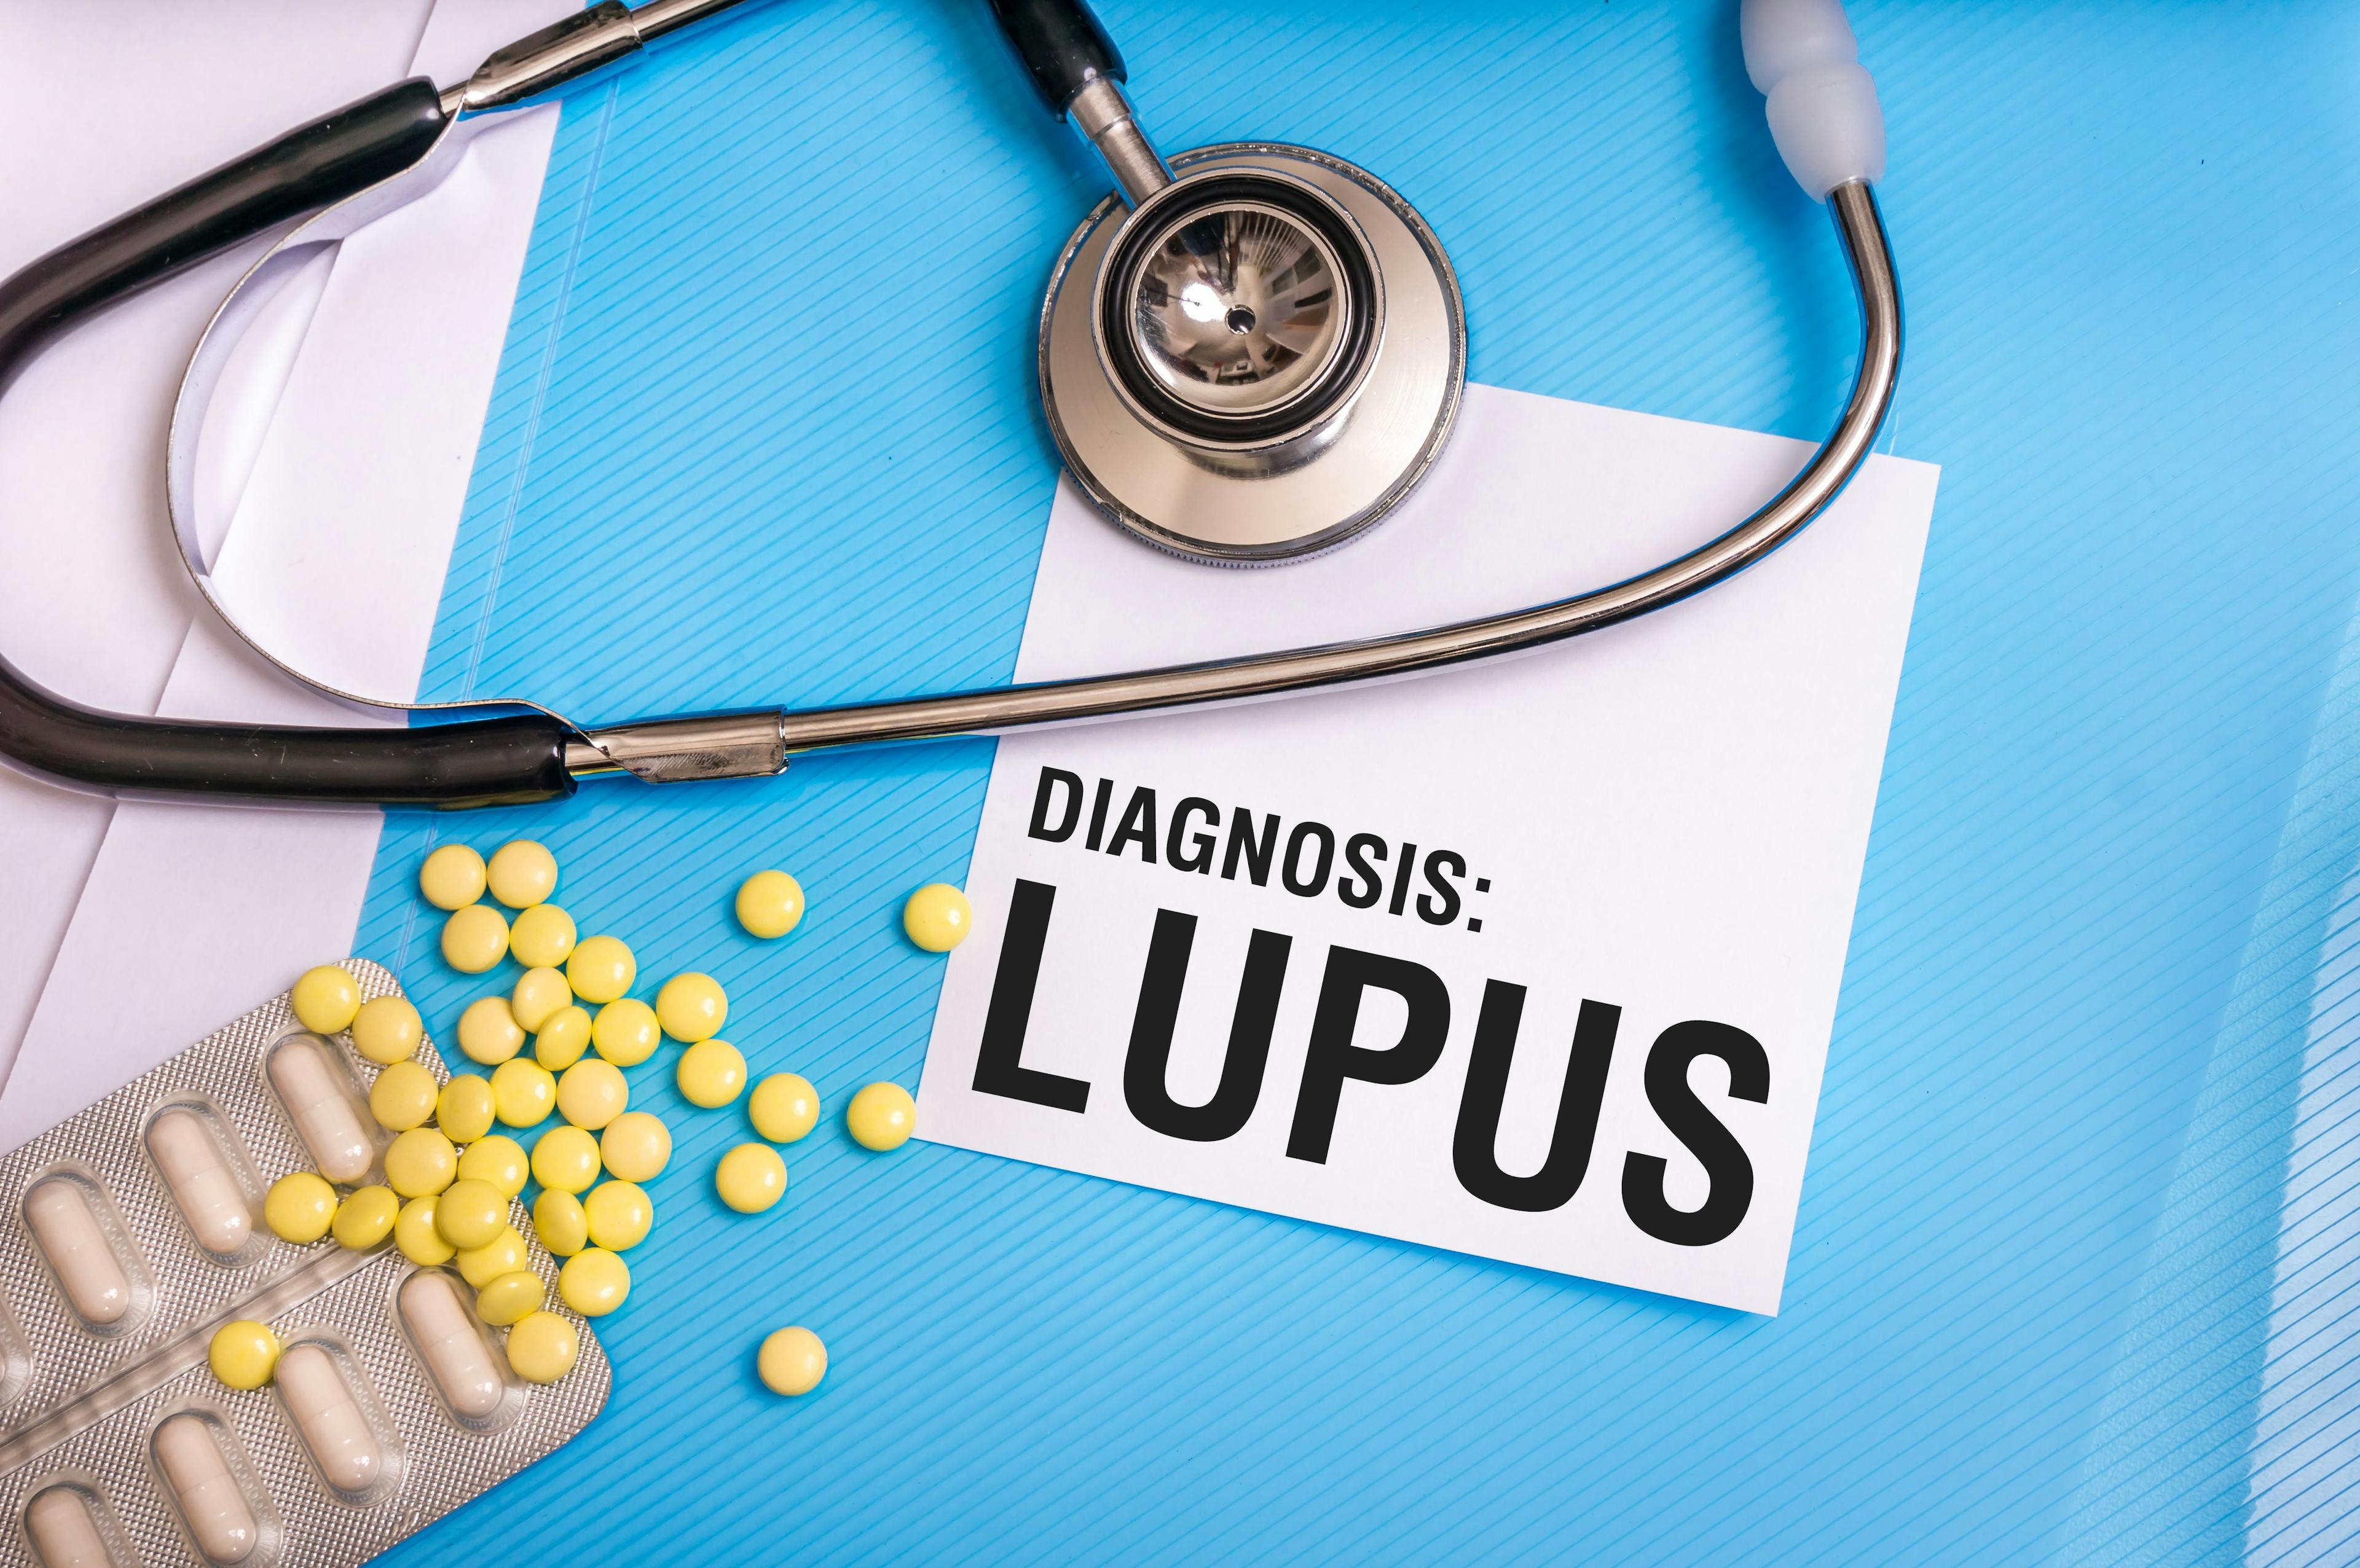 Lupus word written on medical blue folder with patient files | Image Credit: andriano_cz - stock.adobe.com